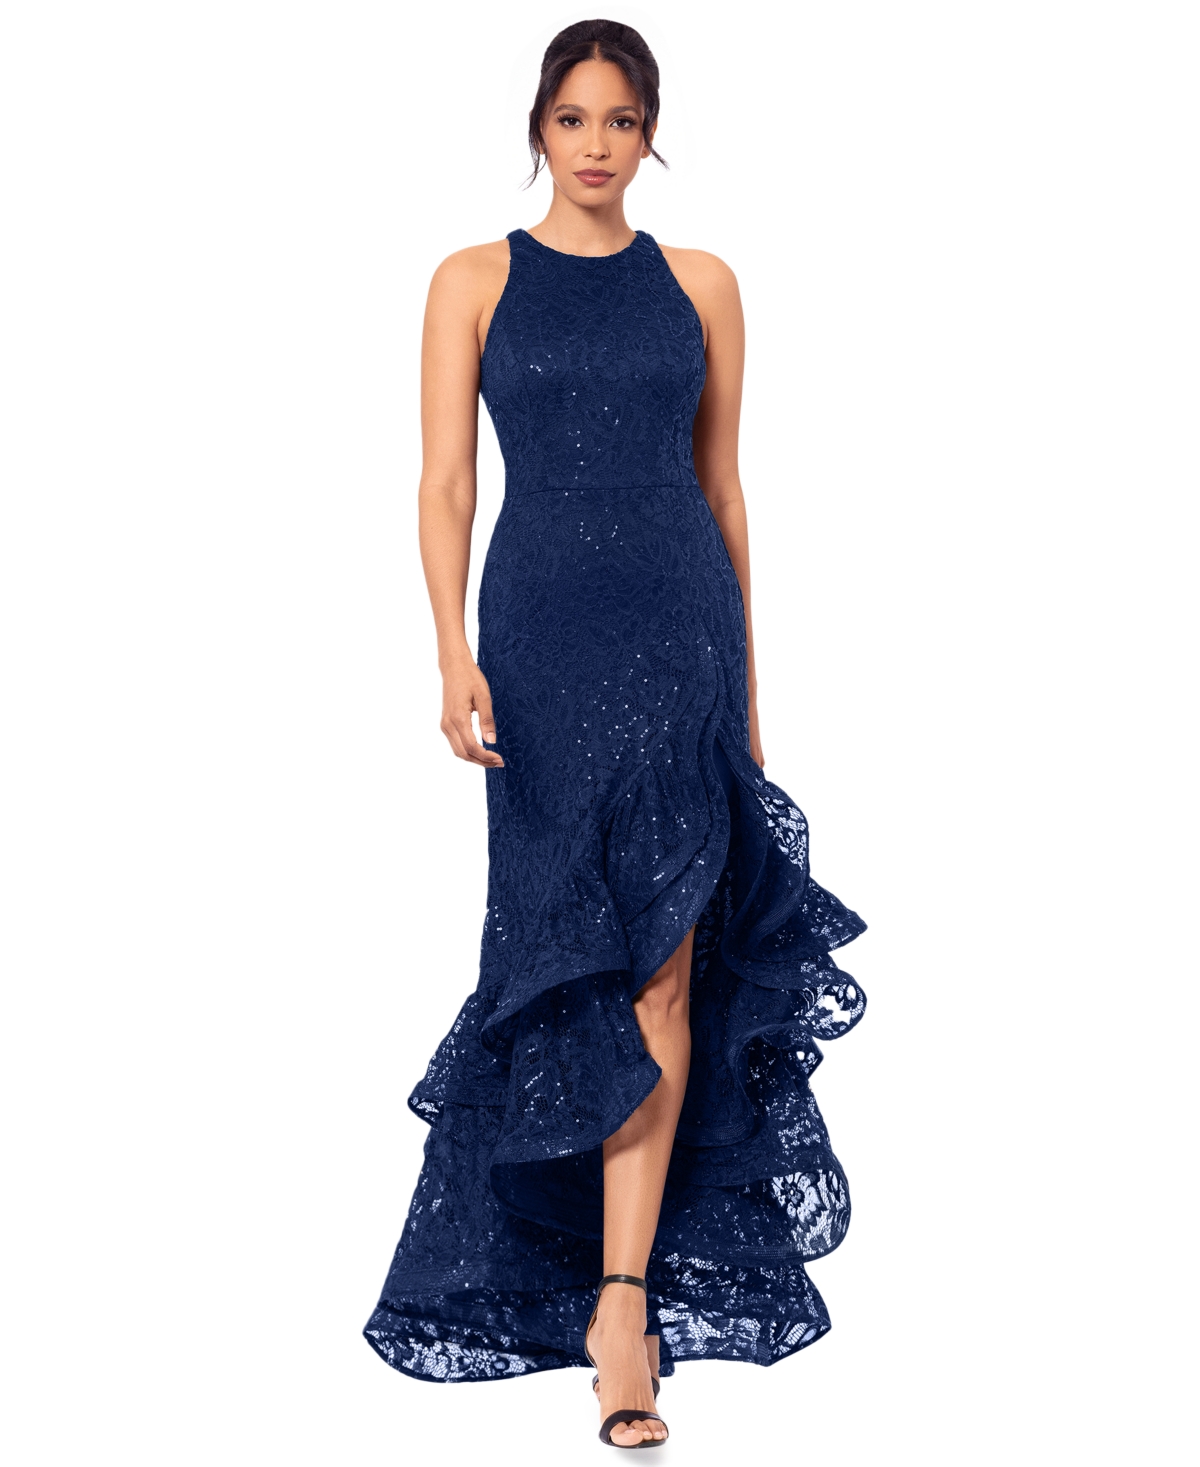 Women's Sequined Lace Ruffle-Hem Gown - Navy